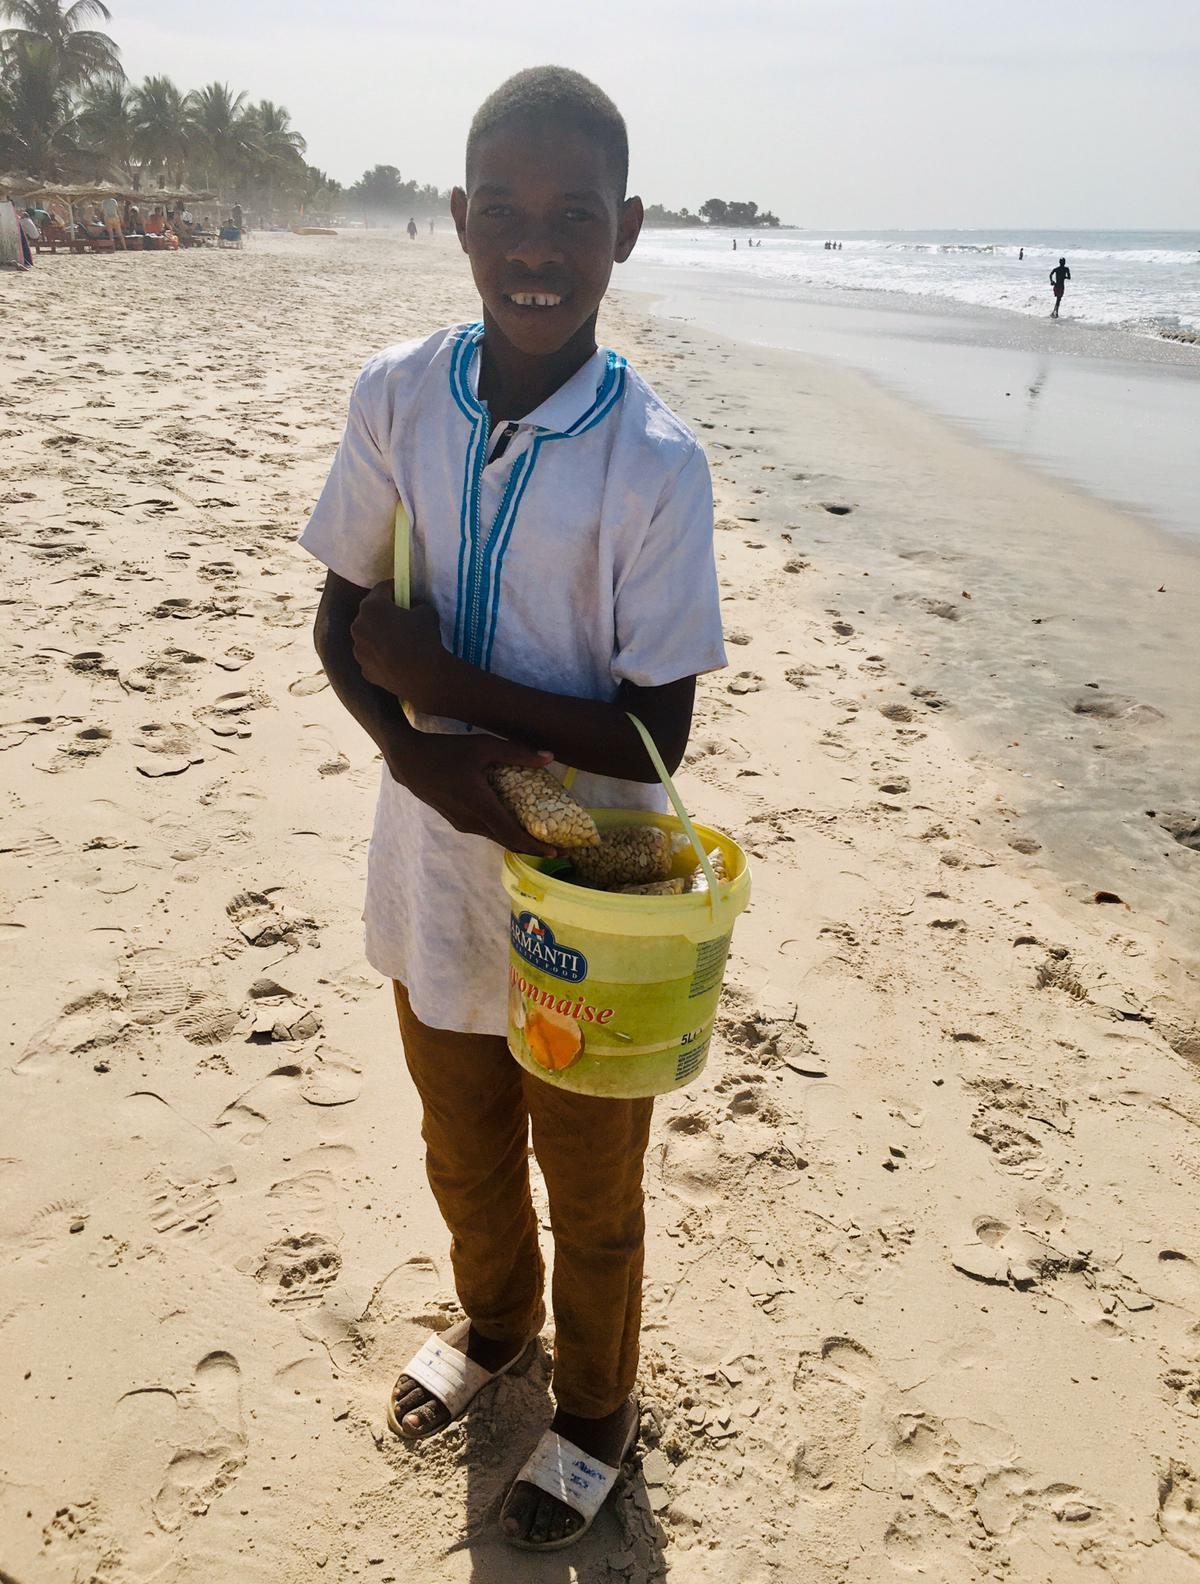  A child smiles on the beach in The Gambia, where thousands of Brits flock every year. There's no suggestion he is caught up in the child sex tourism trade